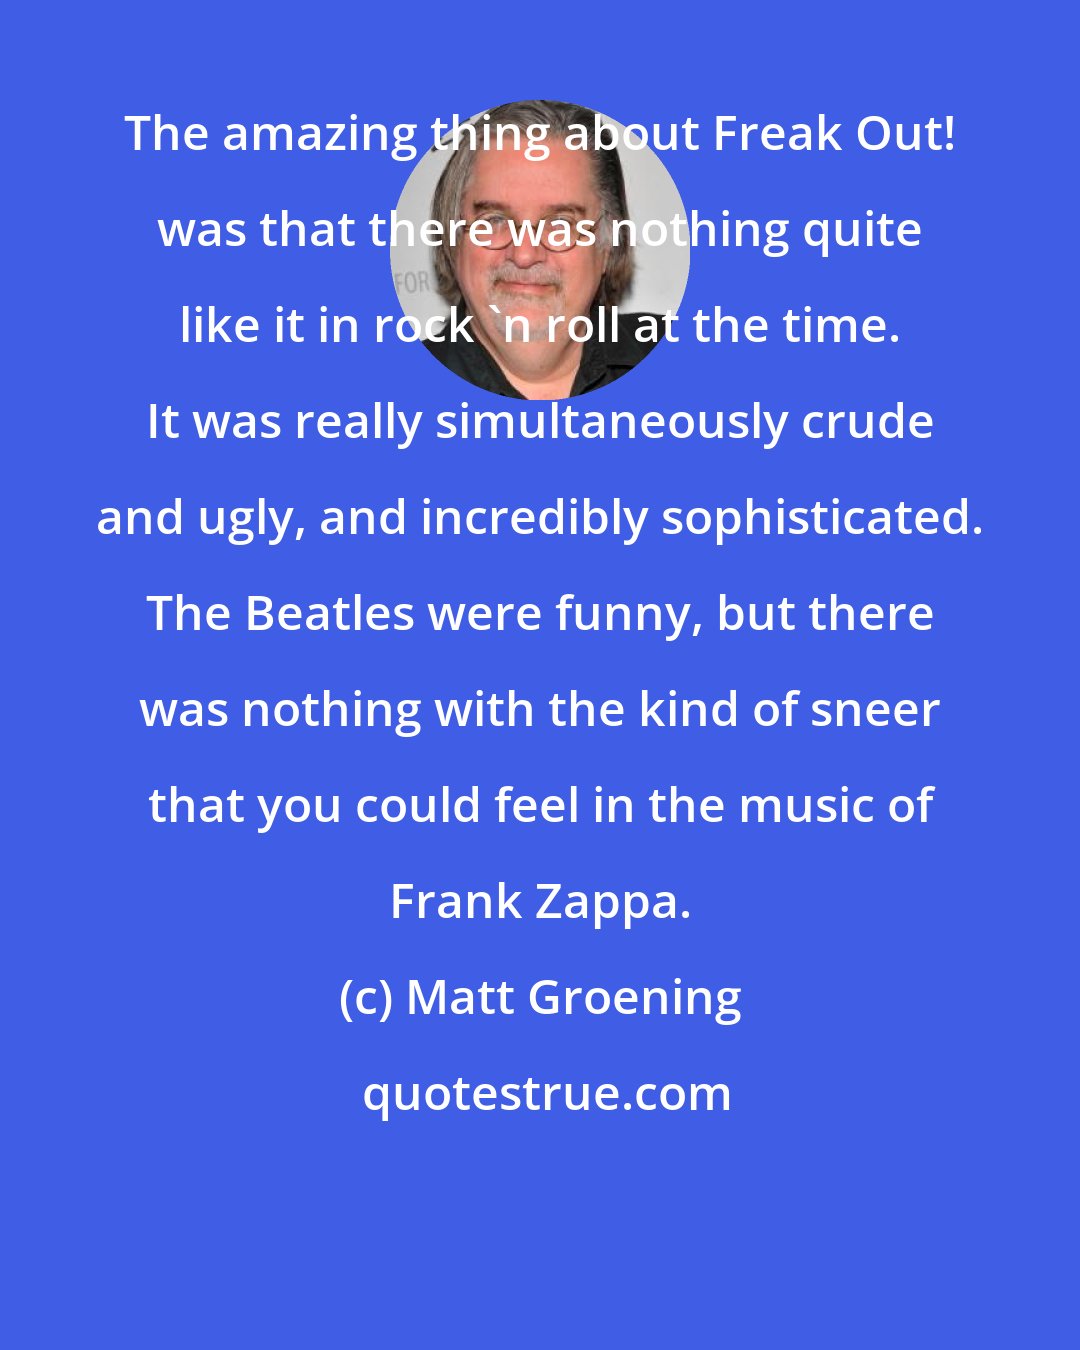 Matt Groening: The amazing thing about Freak Out! was that there was nothing quite like it in rock 'n roll at the time. It was really simultaneously crude and ugly, and incredibly sophisticated. The Beatles were funny, but there was nothing with the kind of sneer that you could feel in the music of Frank Zappa.